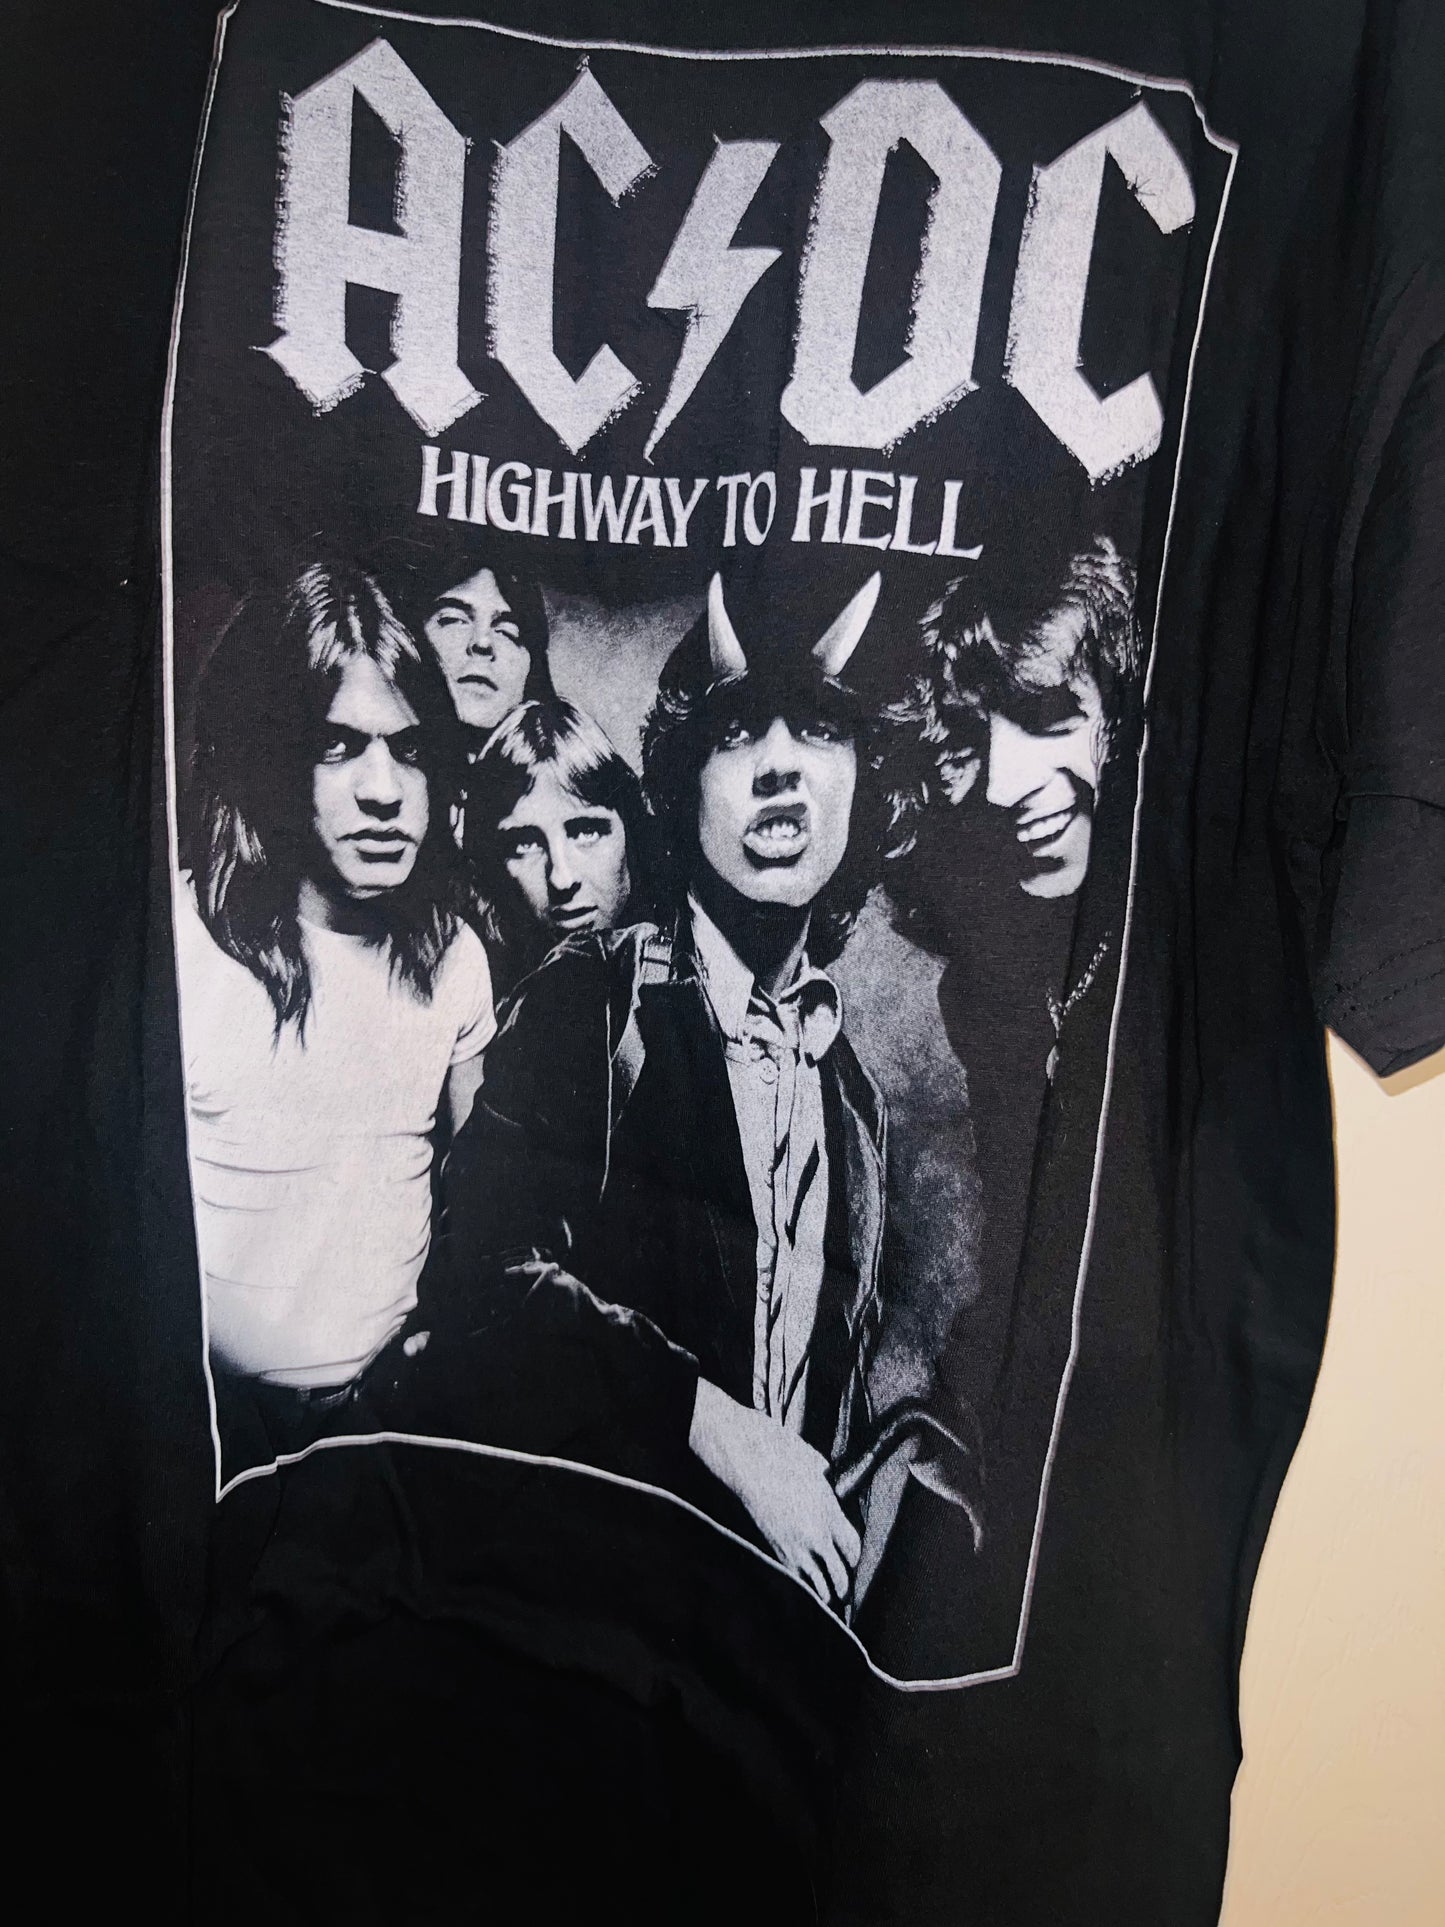 AC/DC Highway to Hell Distressed Oversized Tee (UNBLEACHED)